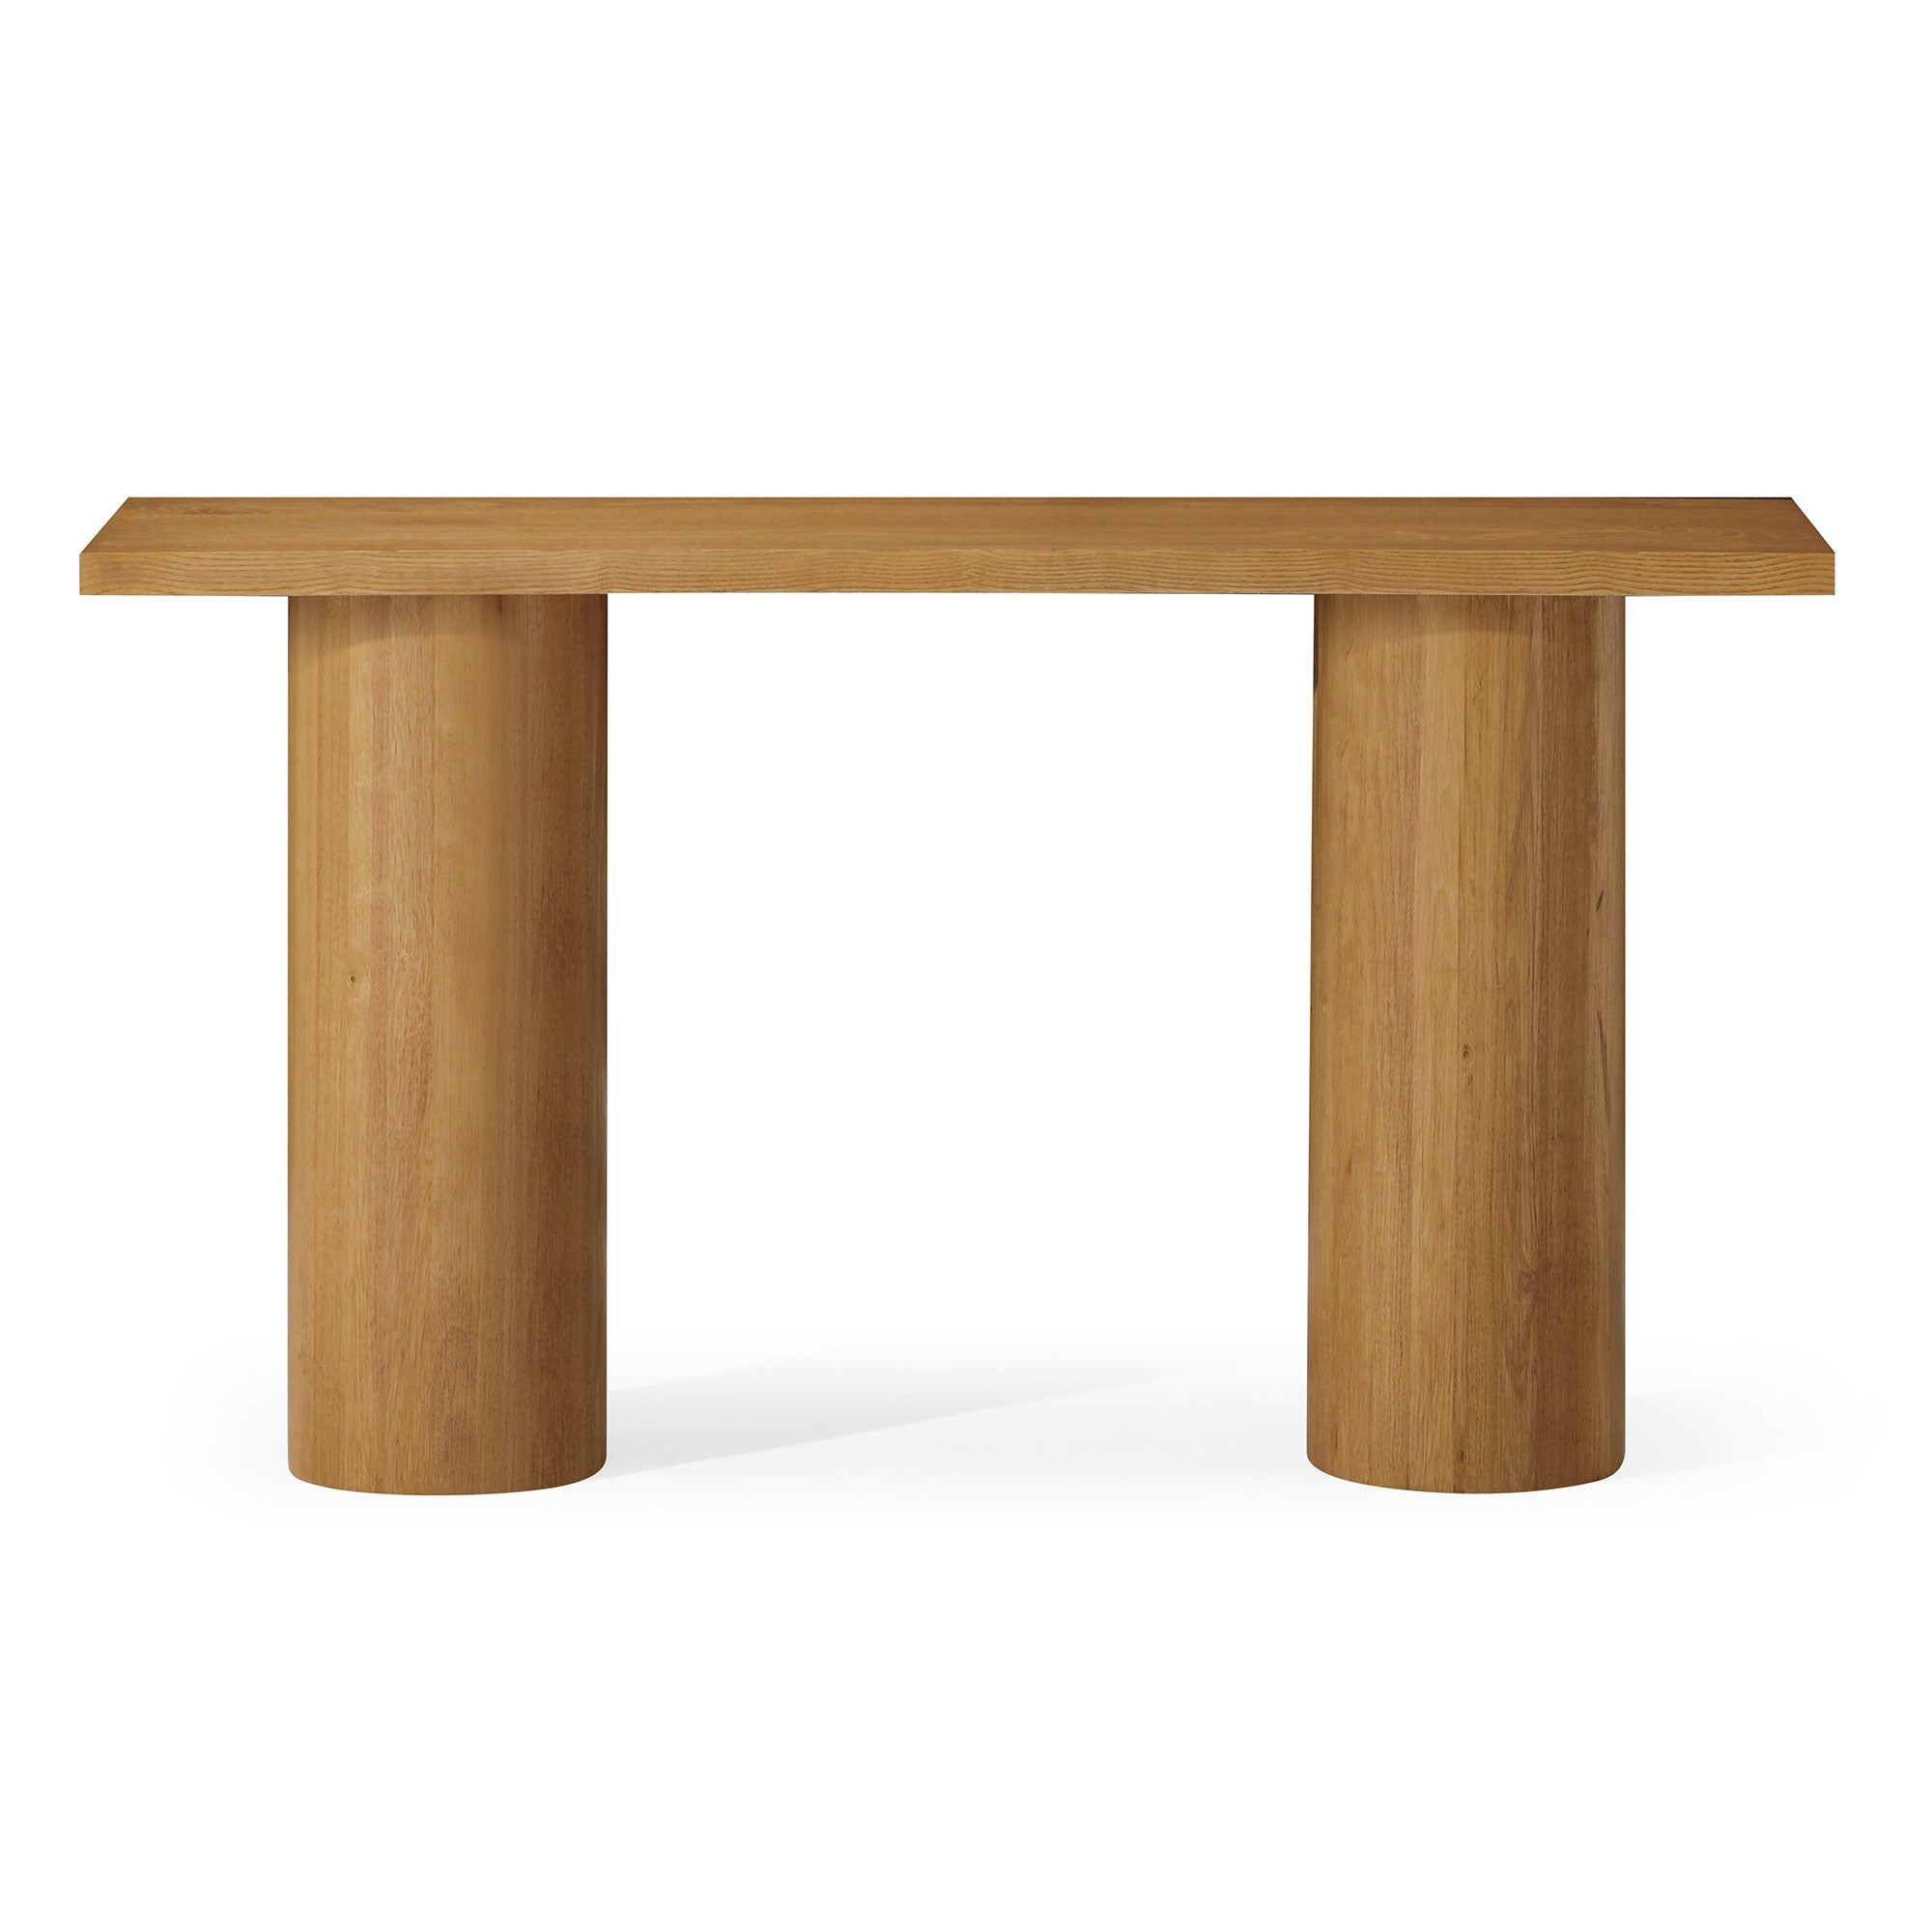 Lana Contemporary Wooden Console Table in Refined Natural Finish